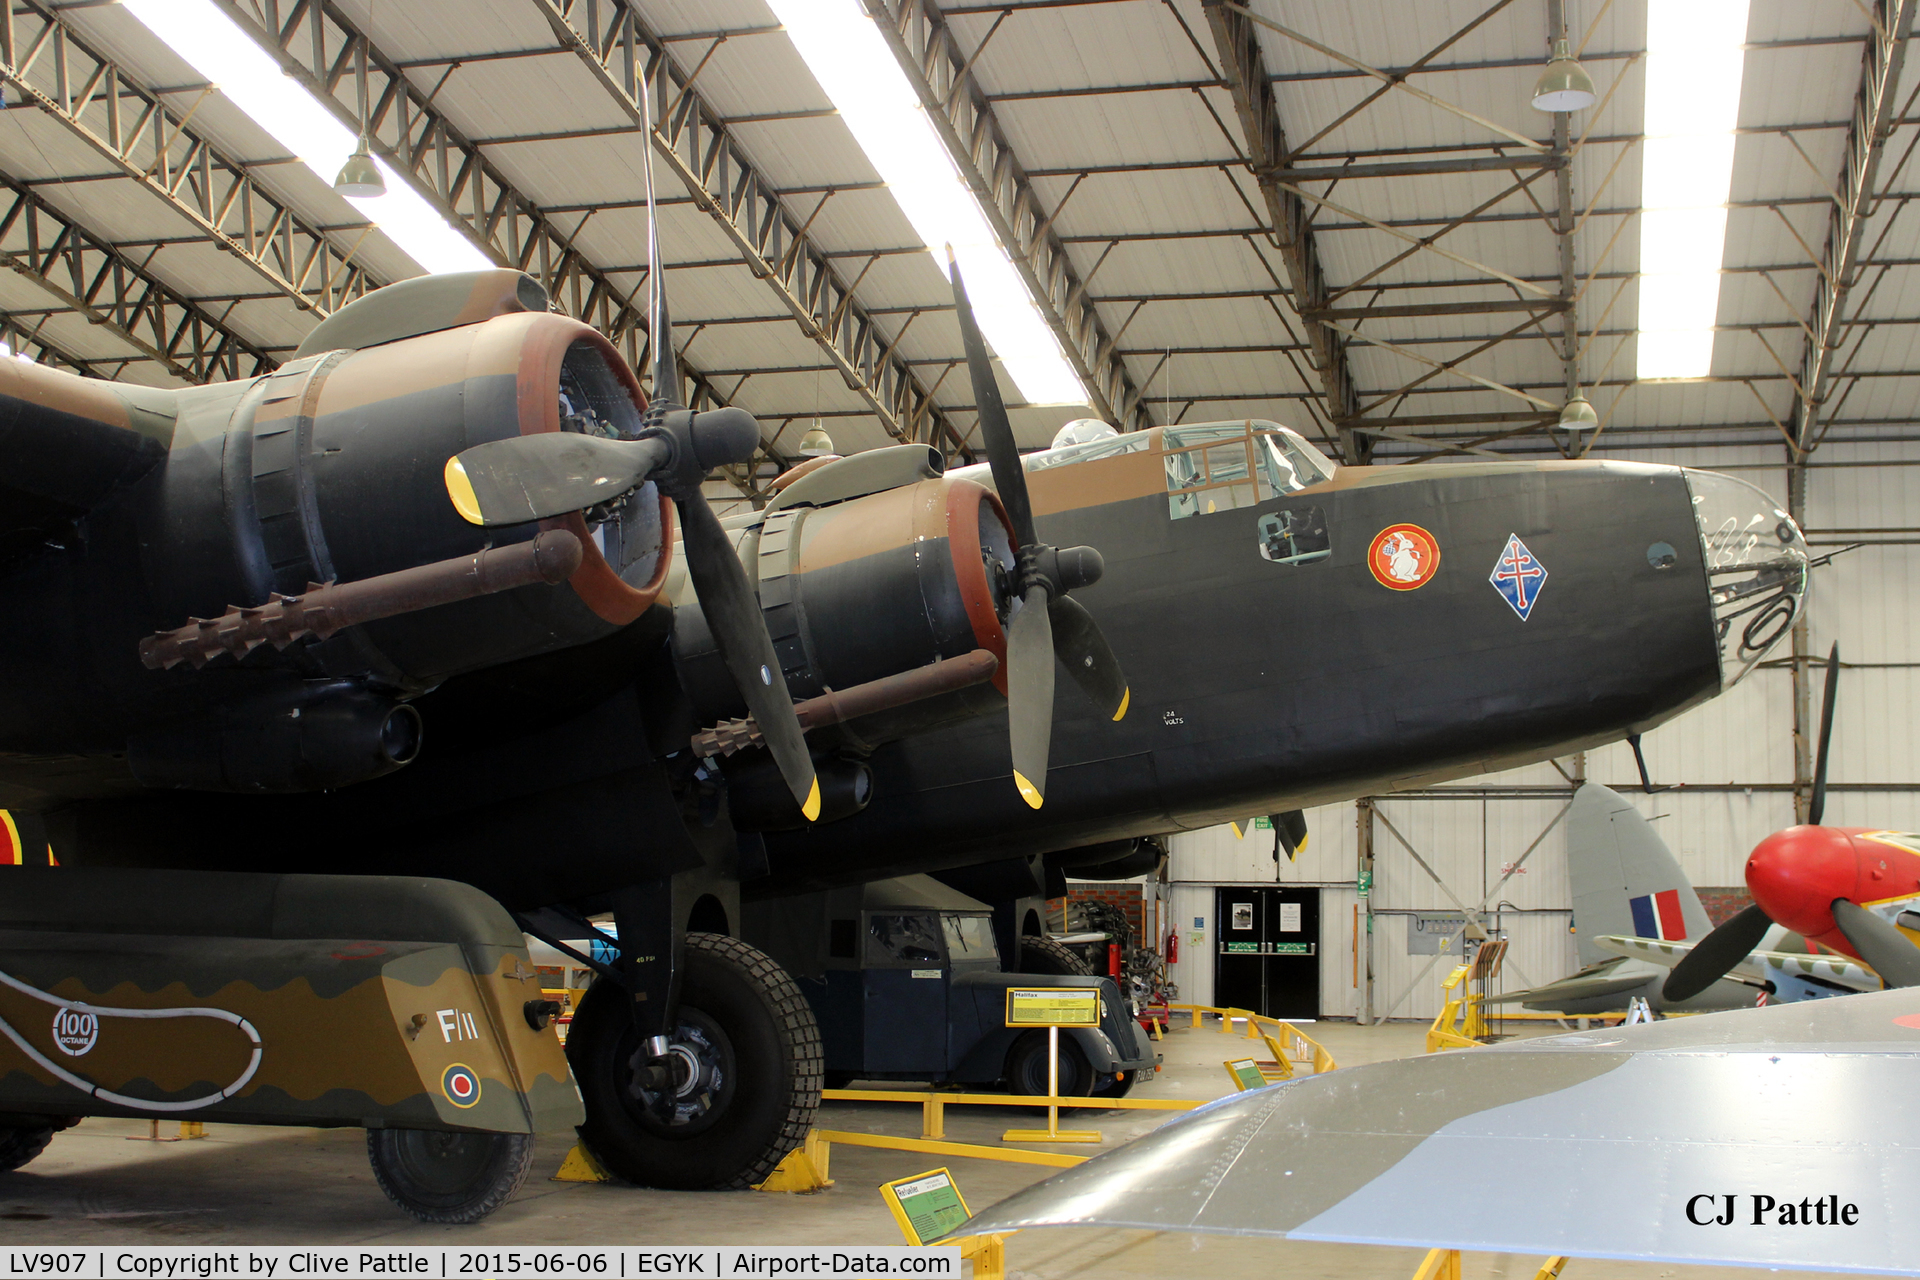 LV907, Handley Page HP-59 Halifax III C/N HR792, On display at the Yorkshire Air Museum EGYK